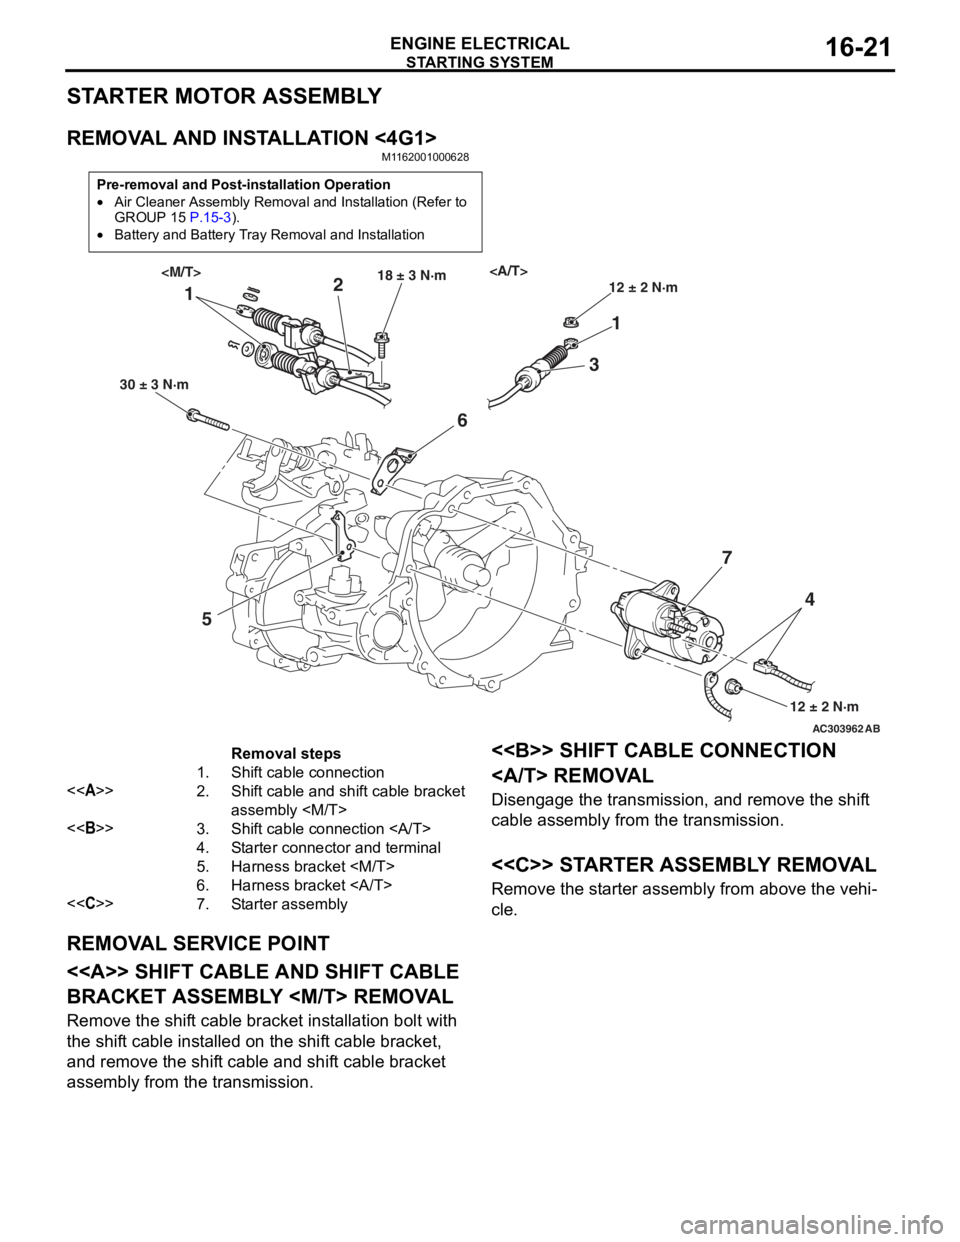 MITSUBISHI LANCER 2006  Workshop Manual 
STARTING SYSTEM
ENGINE ELECTRICAL16-21
STARTER MOTOR ASSEMBLY
REMOVAL AND INSTALLATION <4G1>
M1162001000628
Pre-removal and Post-installation Operation
•Air Cleaner Assembly Removal and Installatio